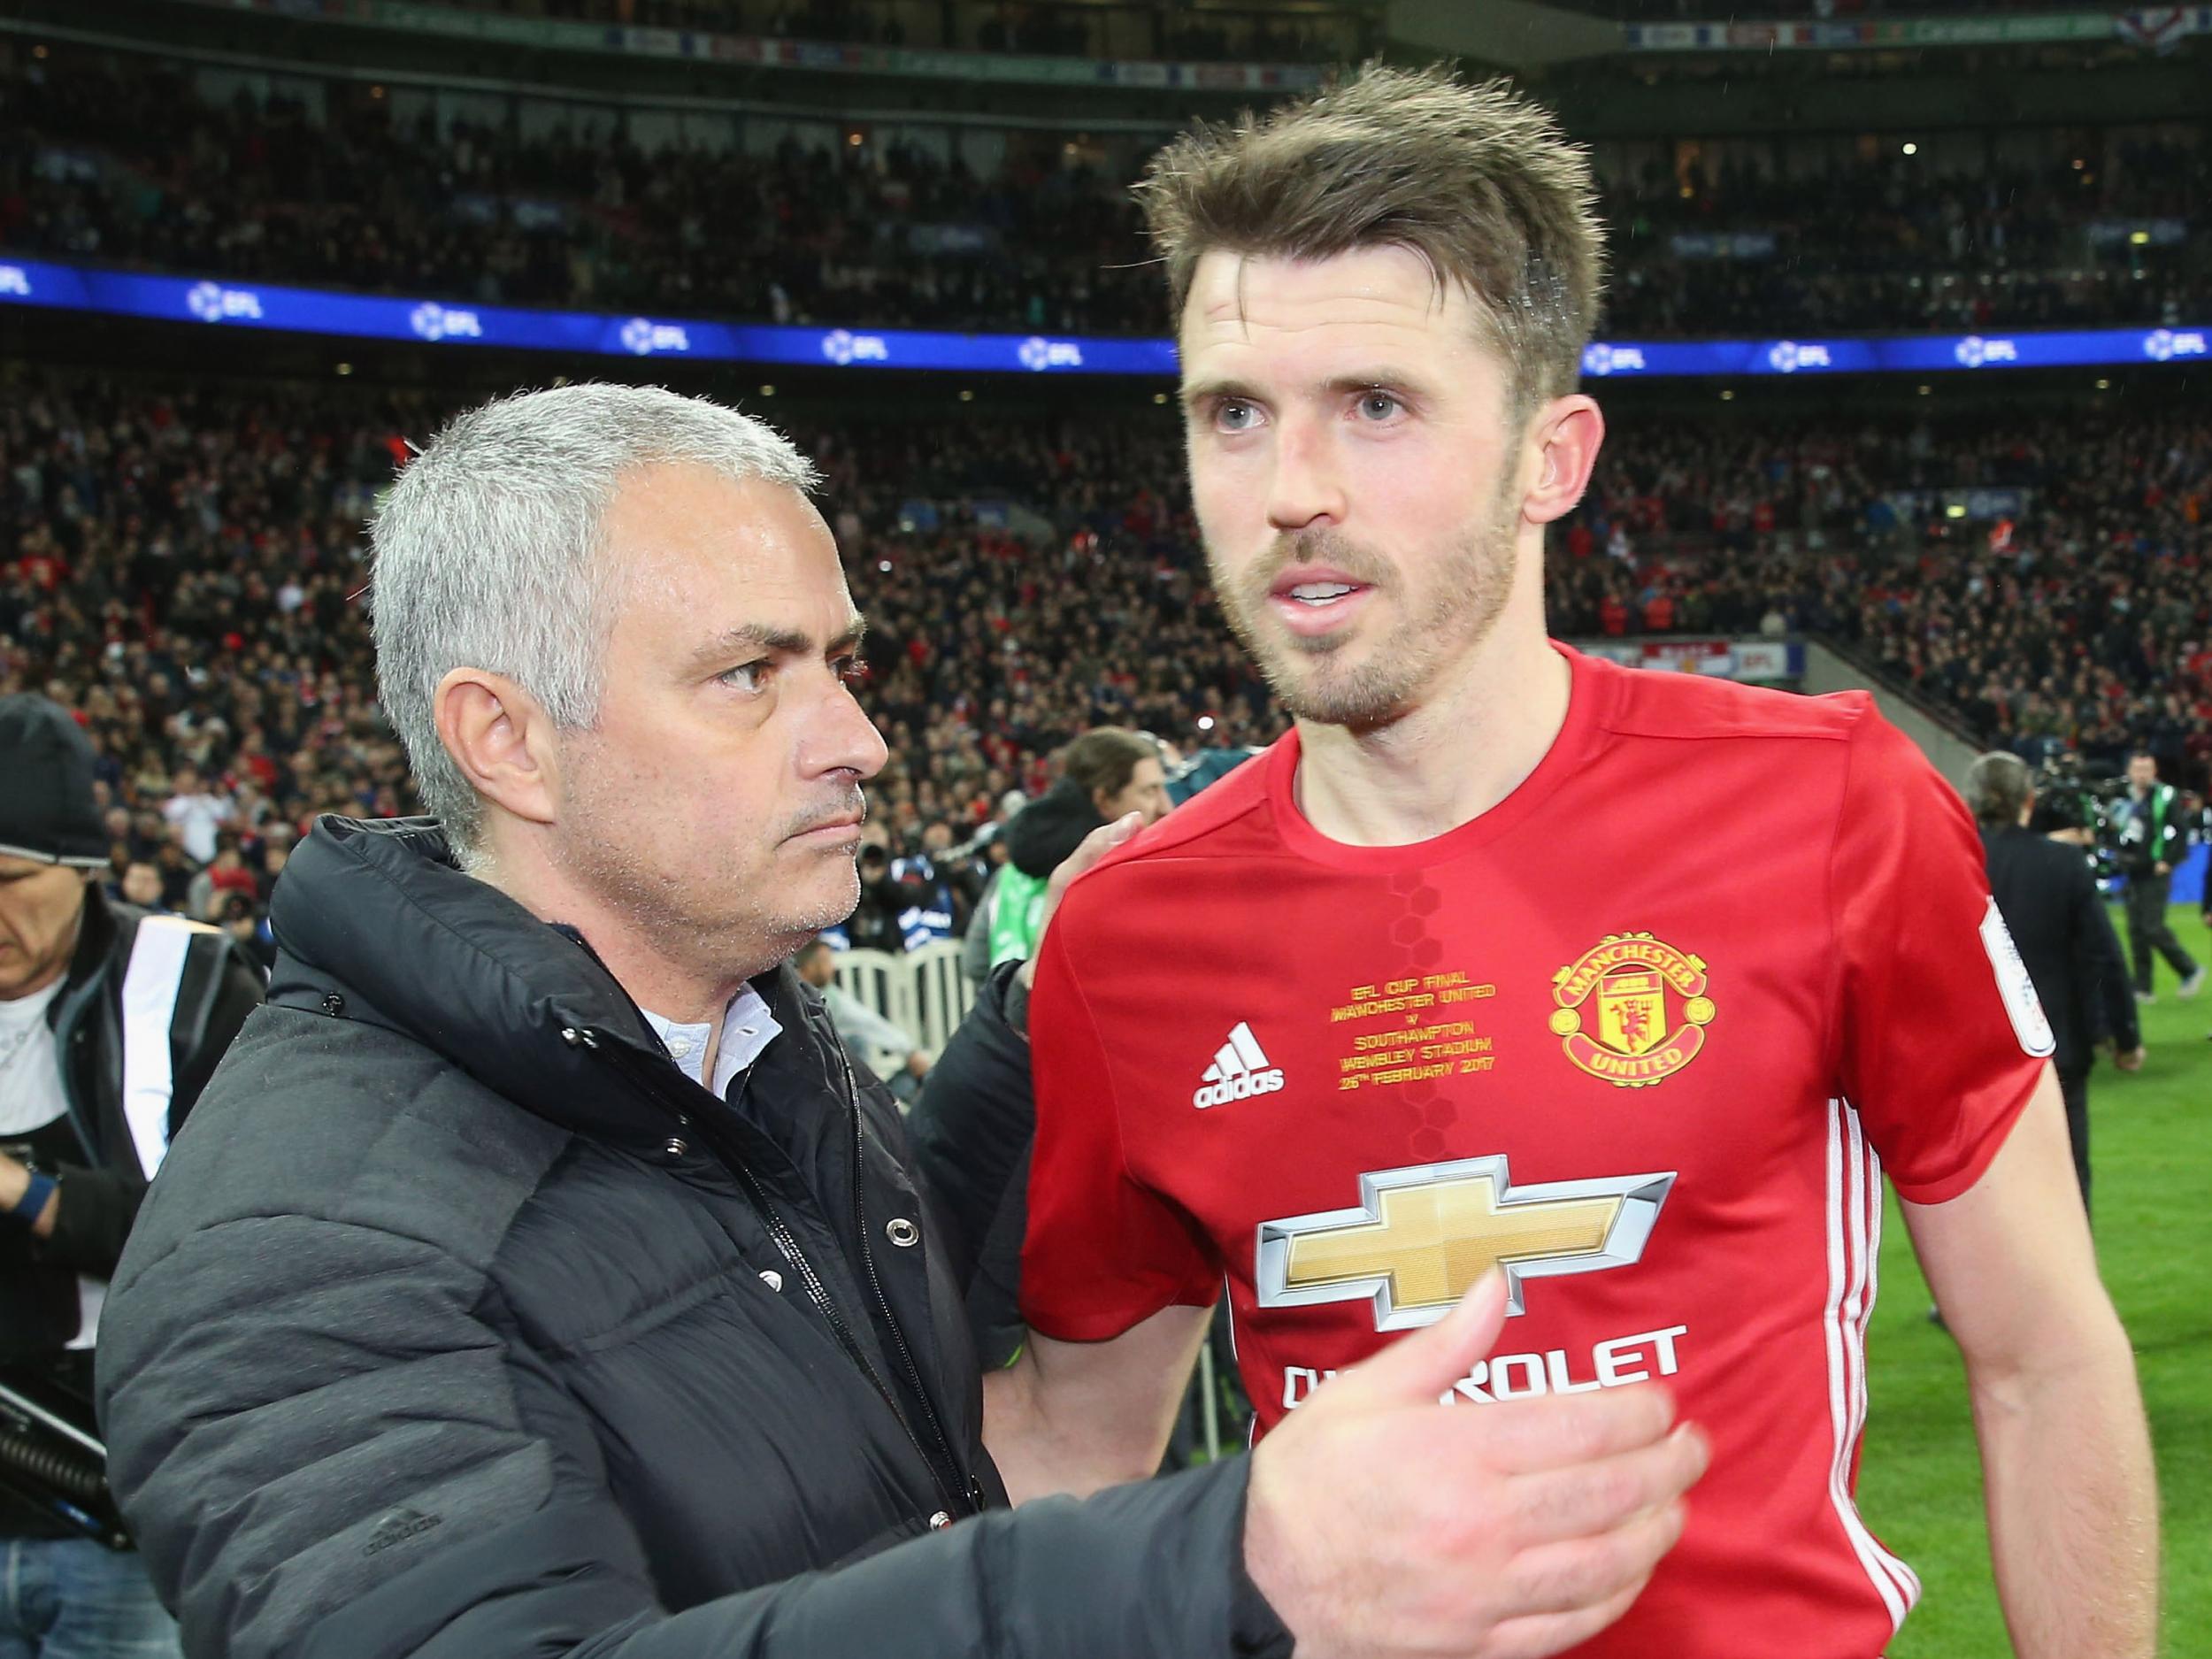 Carrick has only featured once for United this season